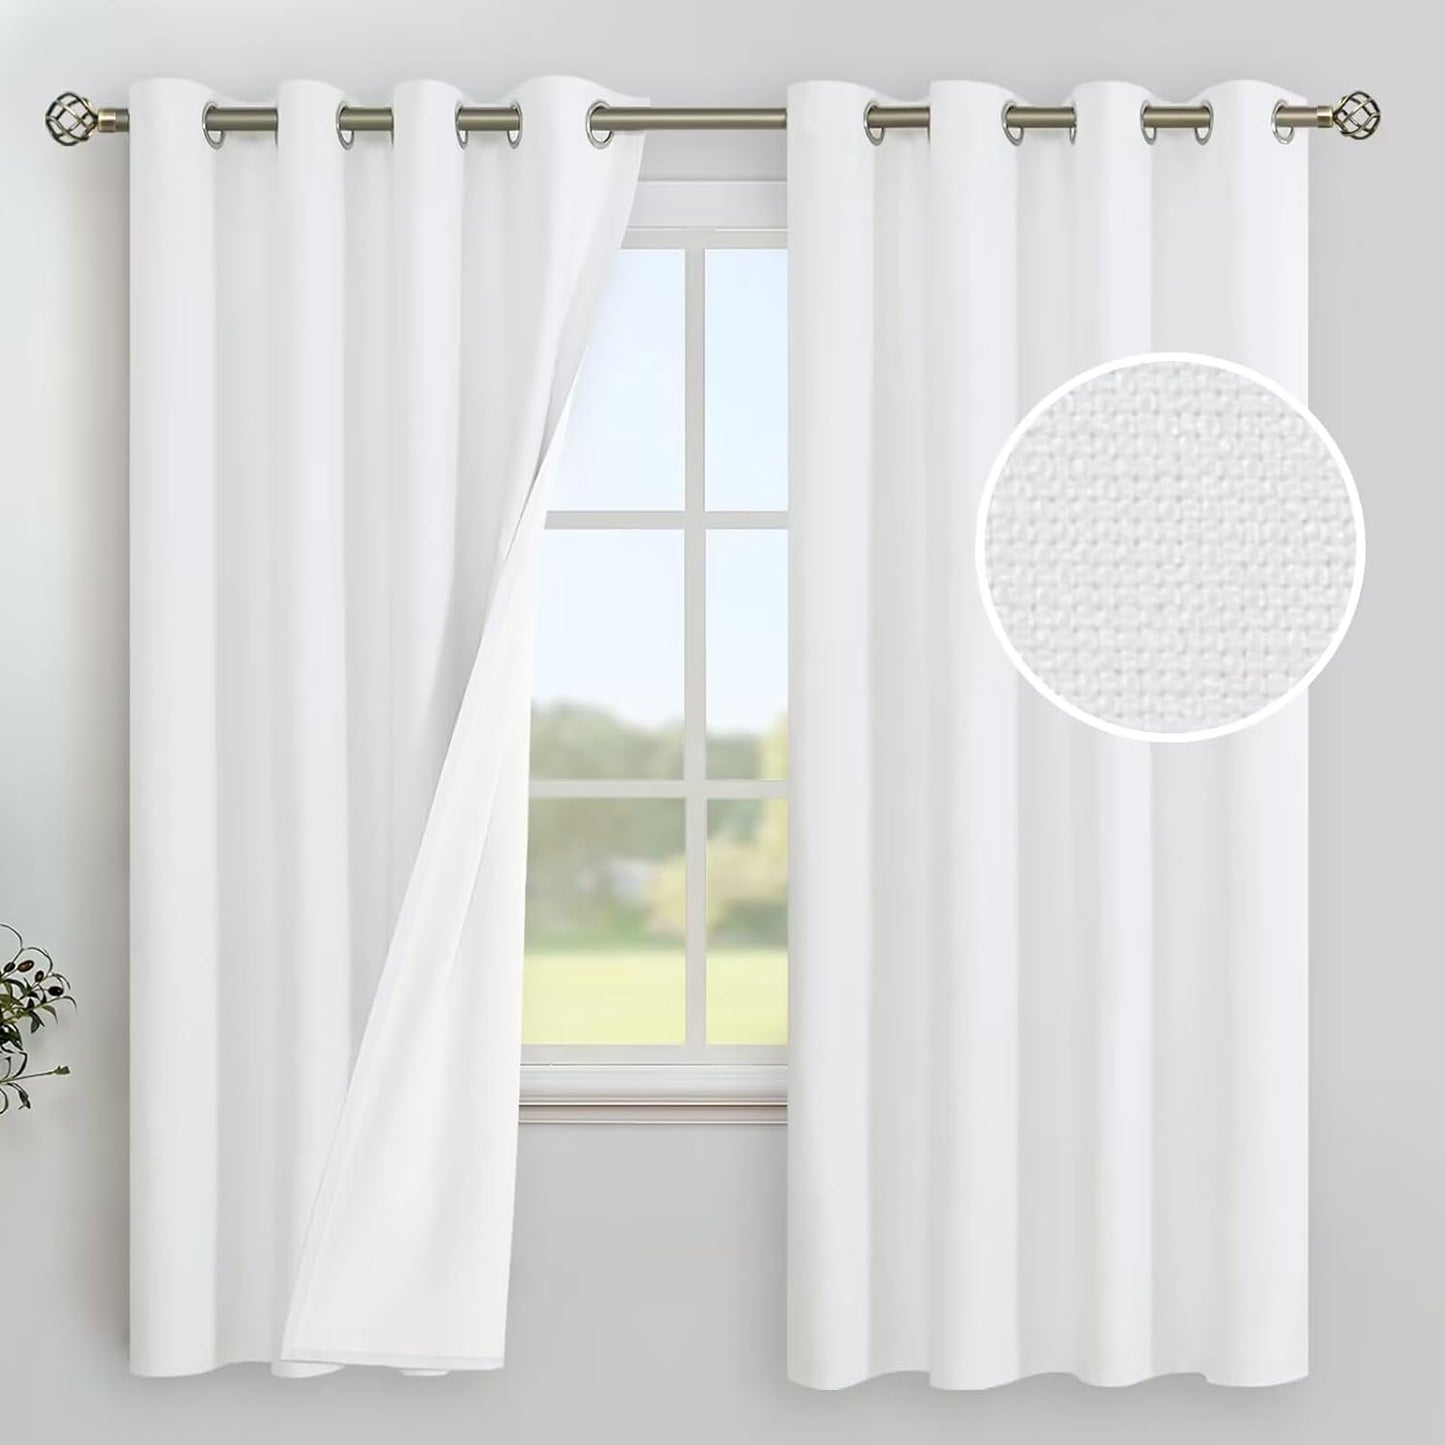 Youngstex Linen Blackout Curtains 63 Inches Long, Grommet Full Room Darkening Linen Window Drapes Thermal Insulated for Living Room Bedroom, 2 Panels, 52 X 63 Inch, Linen  YoungsTex White 52W X 72L 